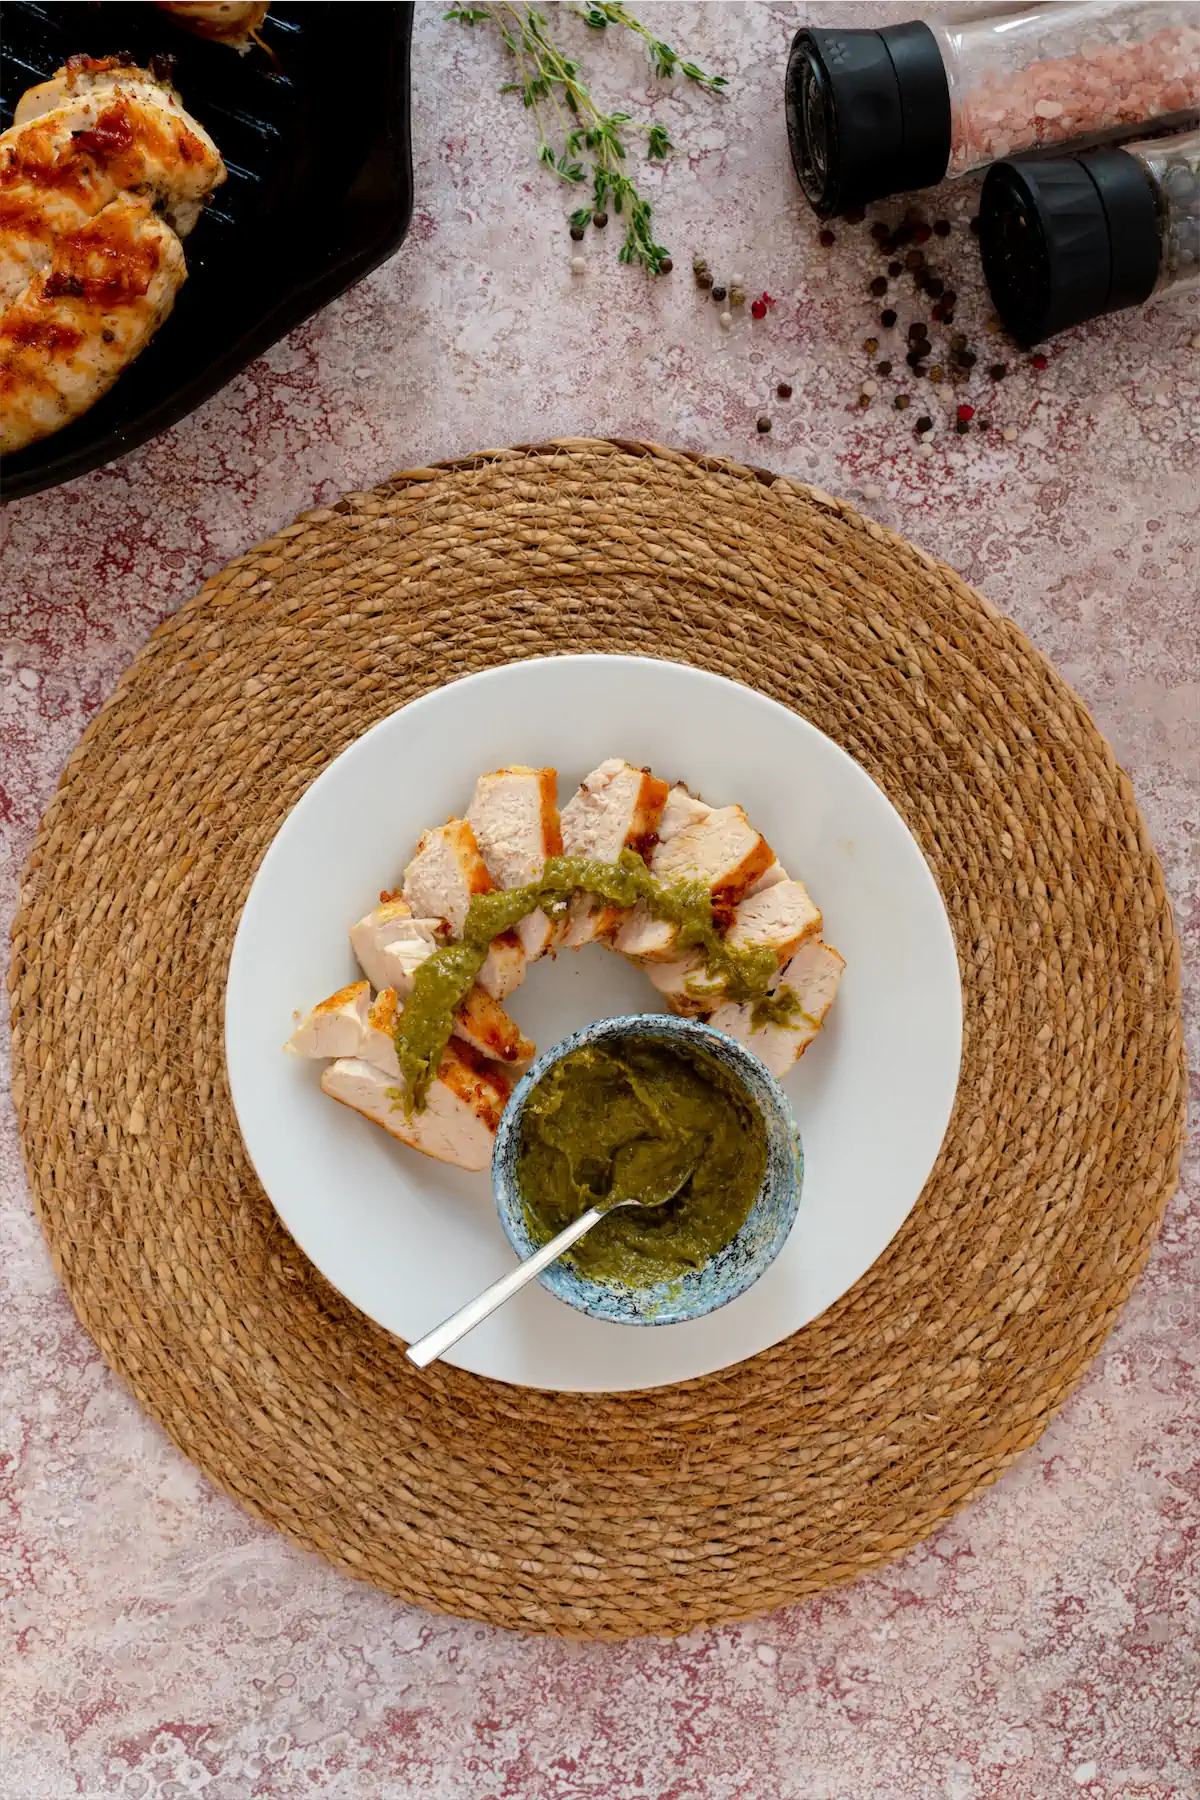 Keto grilled chicken slices drizzled with pesto sauce from the bowl on the same plate.